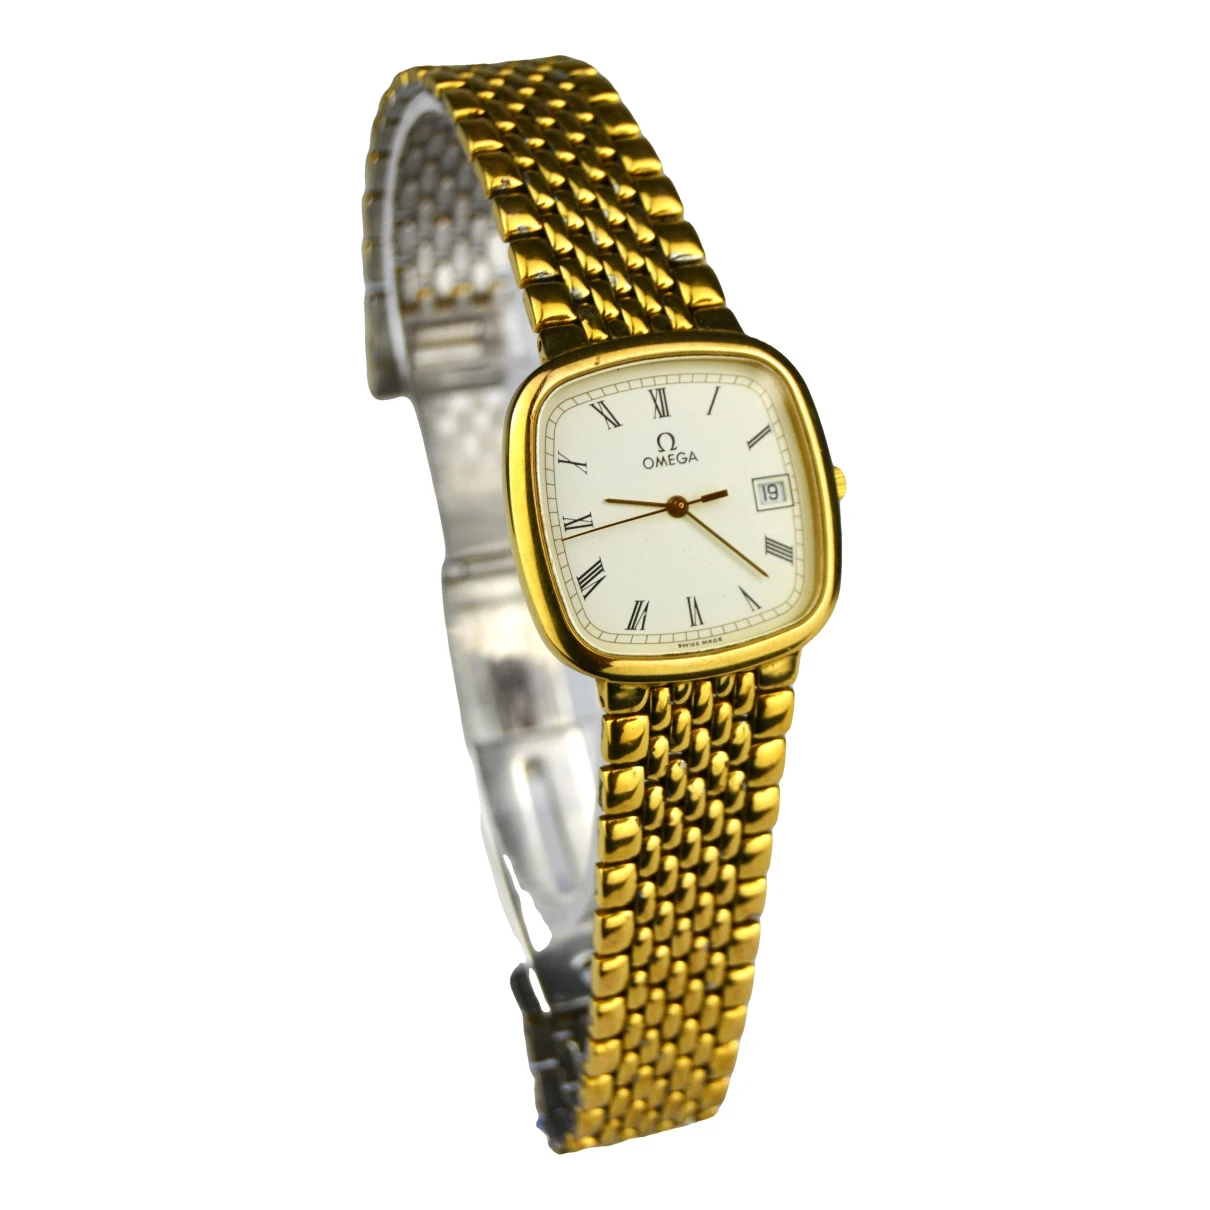 Pre-owned Omega De Ville Watch In Gold